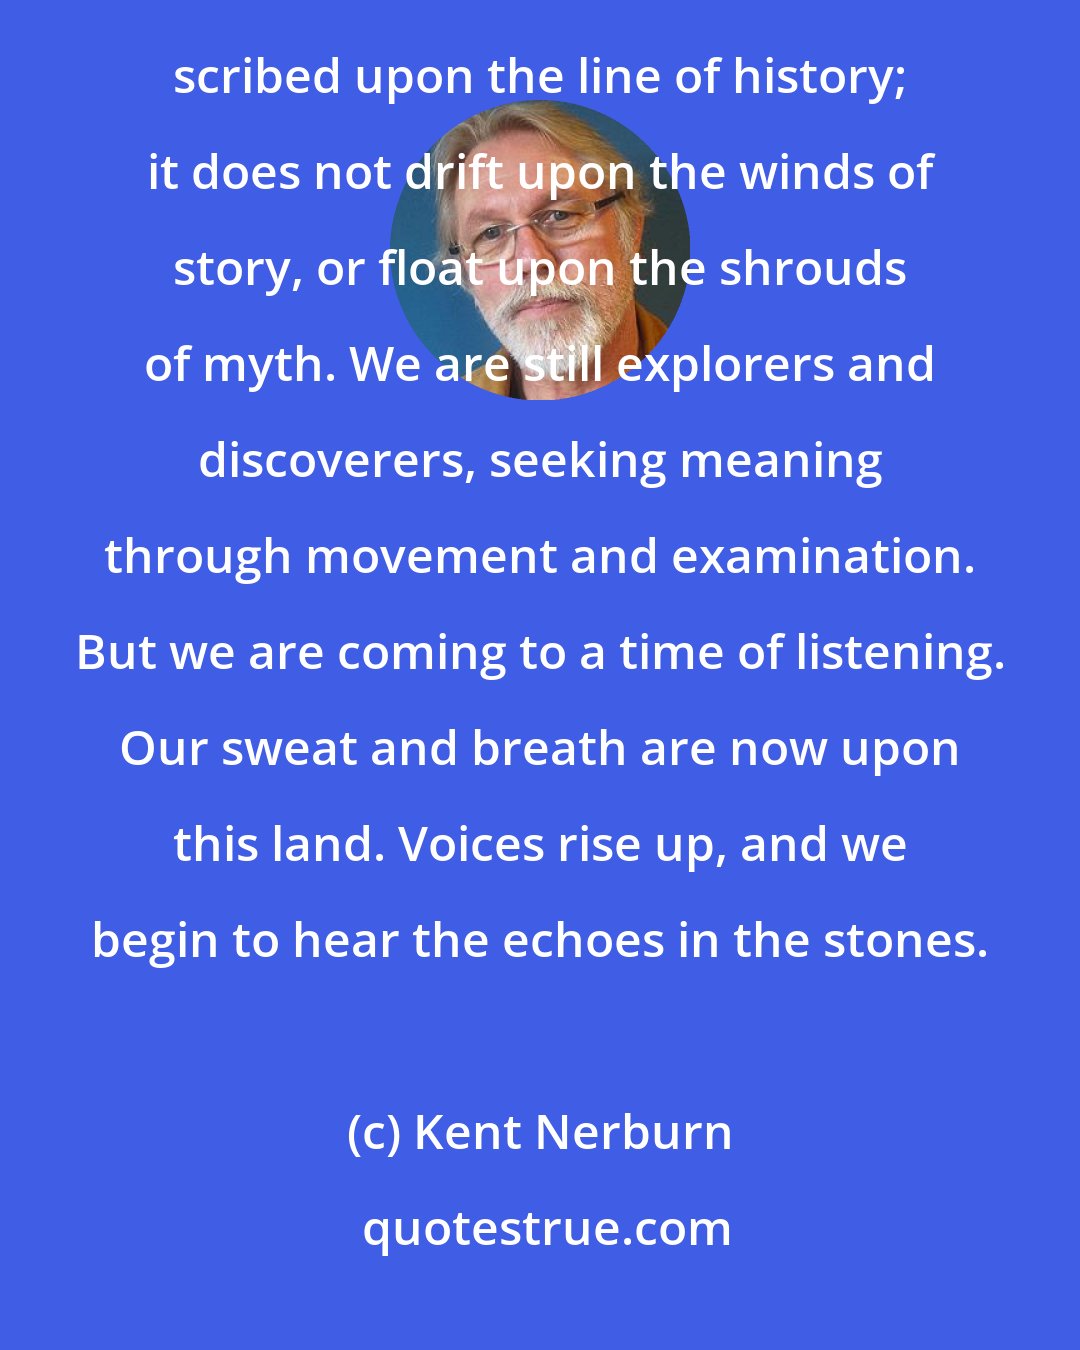 Kent Nerburn: We measure our presence in generations; we cannot dig down ten thousand years and find our bones. Our arrival is scribed upon the line of history; it does not drift upon the winds of story, or float upon the shrouds of myth. We are still explorers and discoverers, seeking meaning through movement and examination. But we are coming to a time of listening. Our sweat and breath are now upon this land. Voices rise up, and we begin to hear the echoes in the stones.